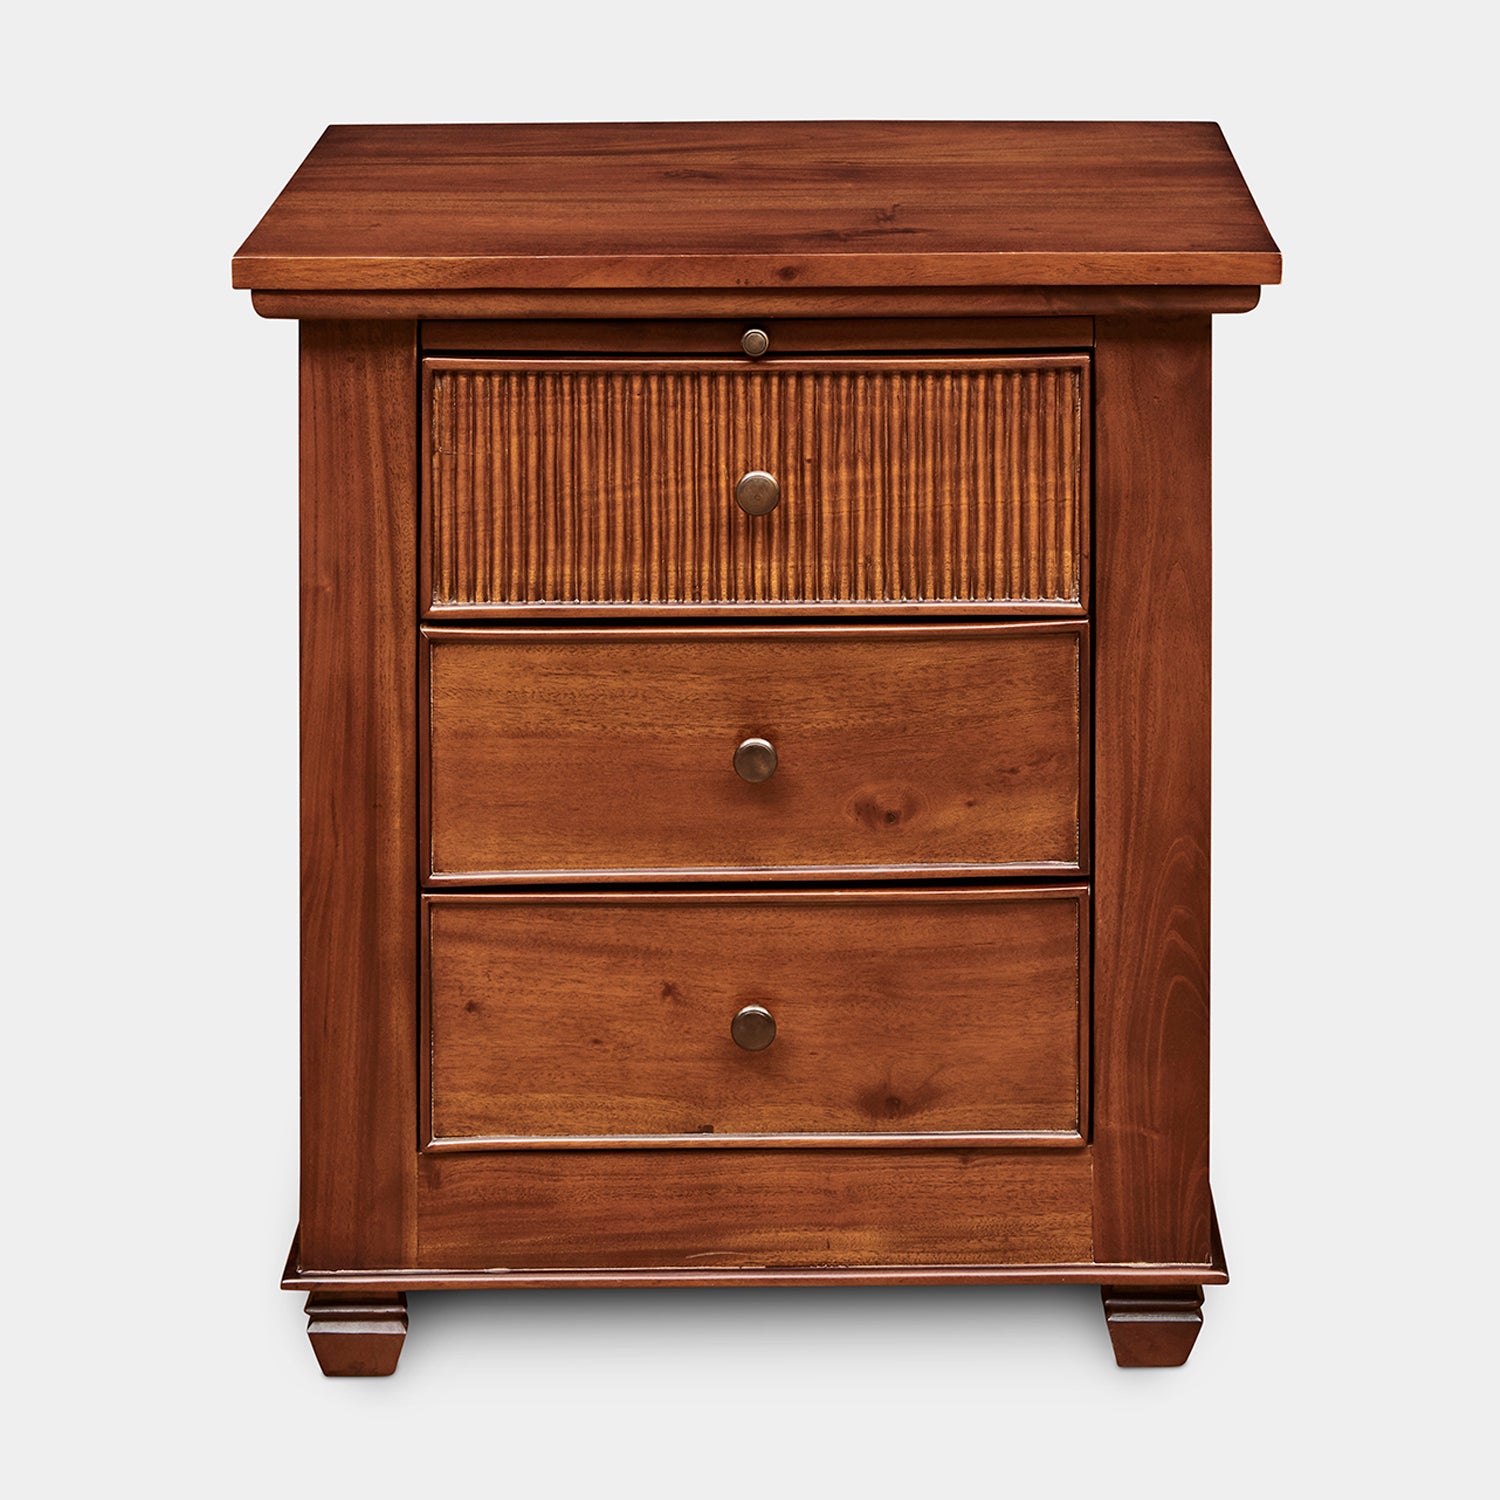 Mahogany-3Drawer-Bedside-Table-Chelmsford-r1